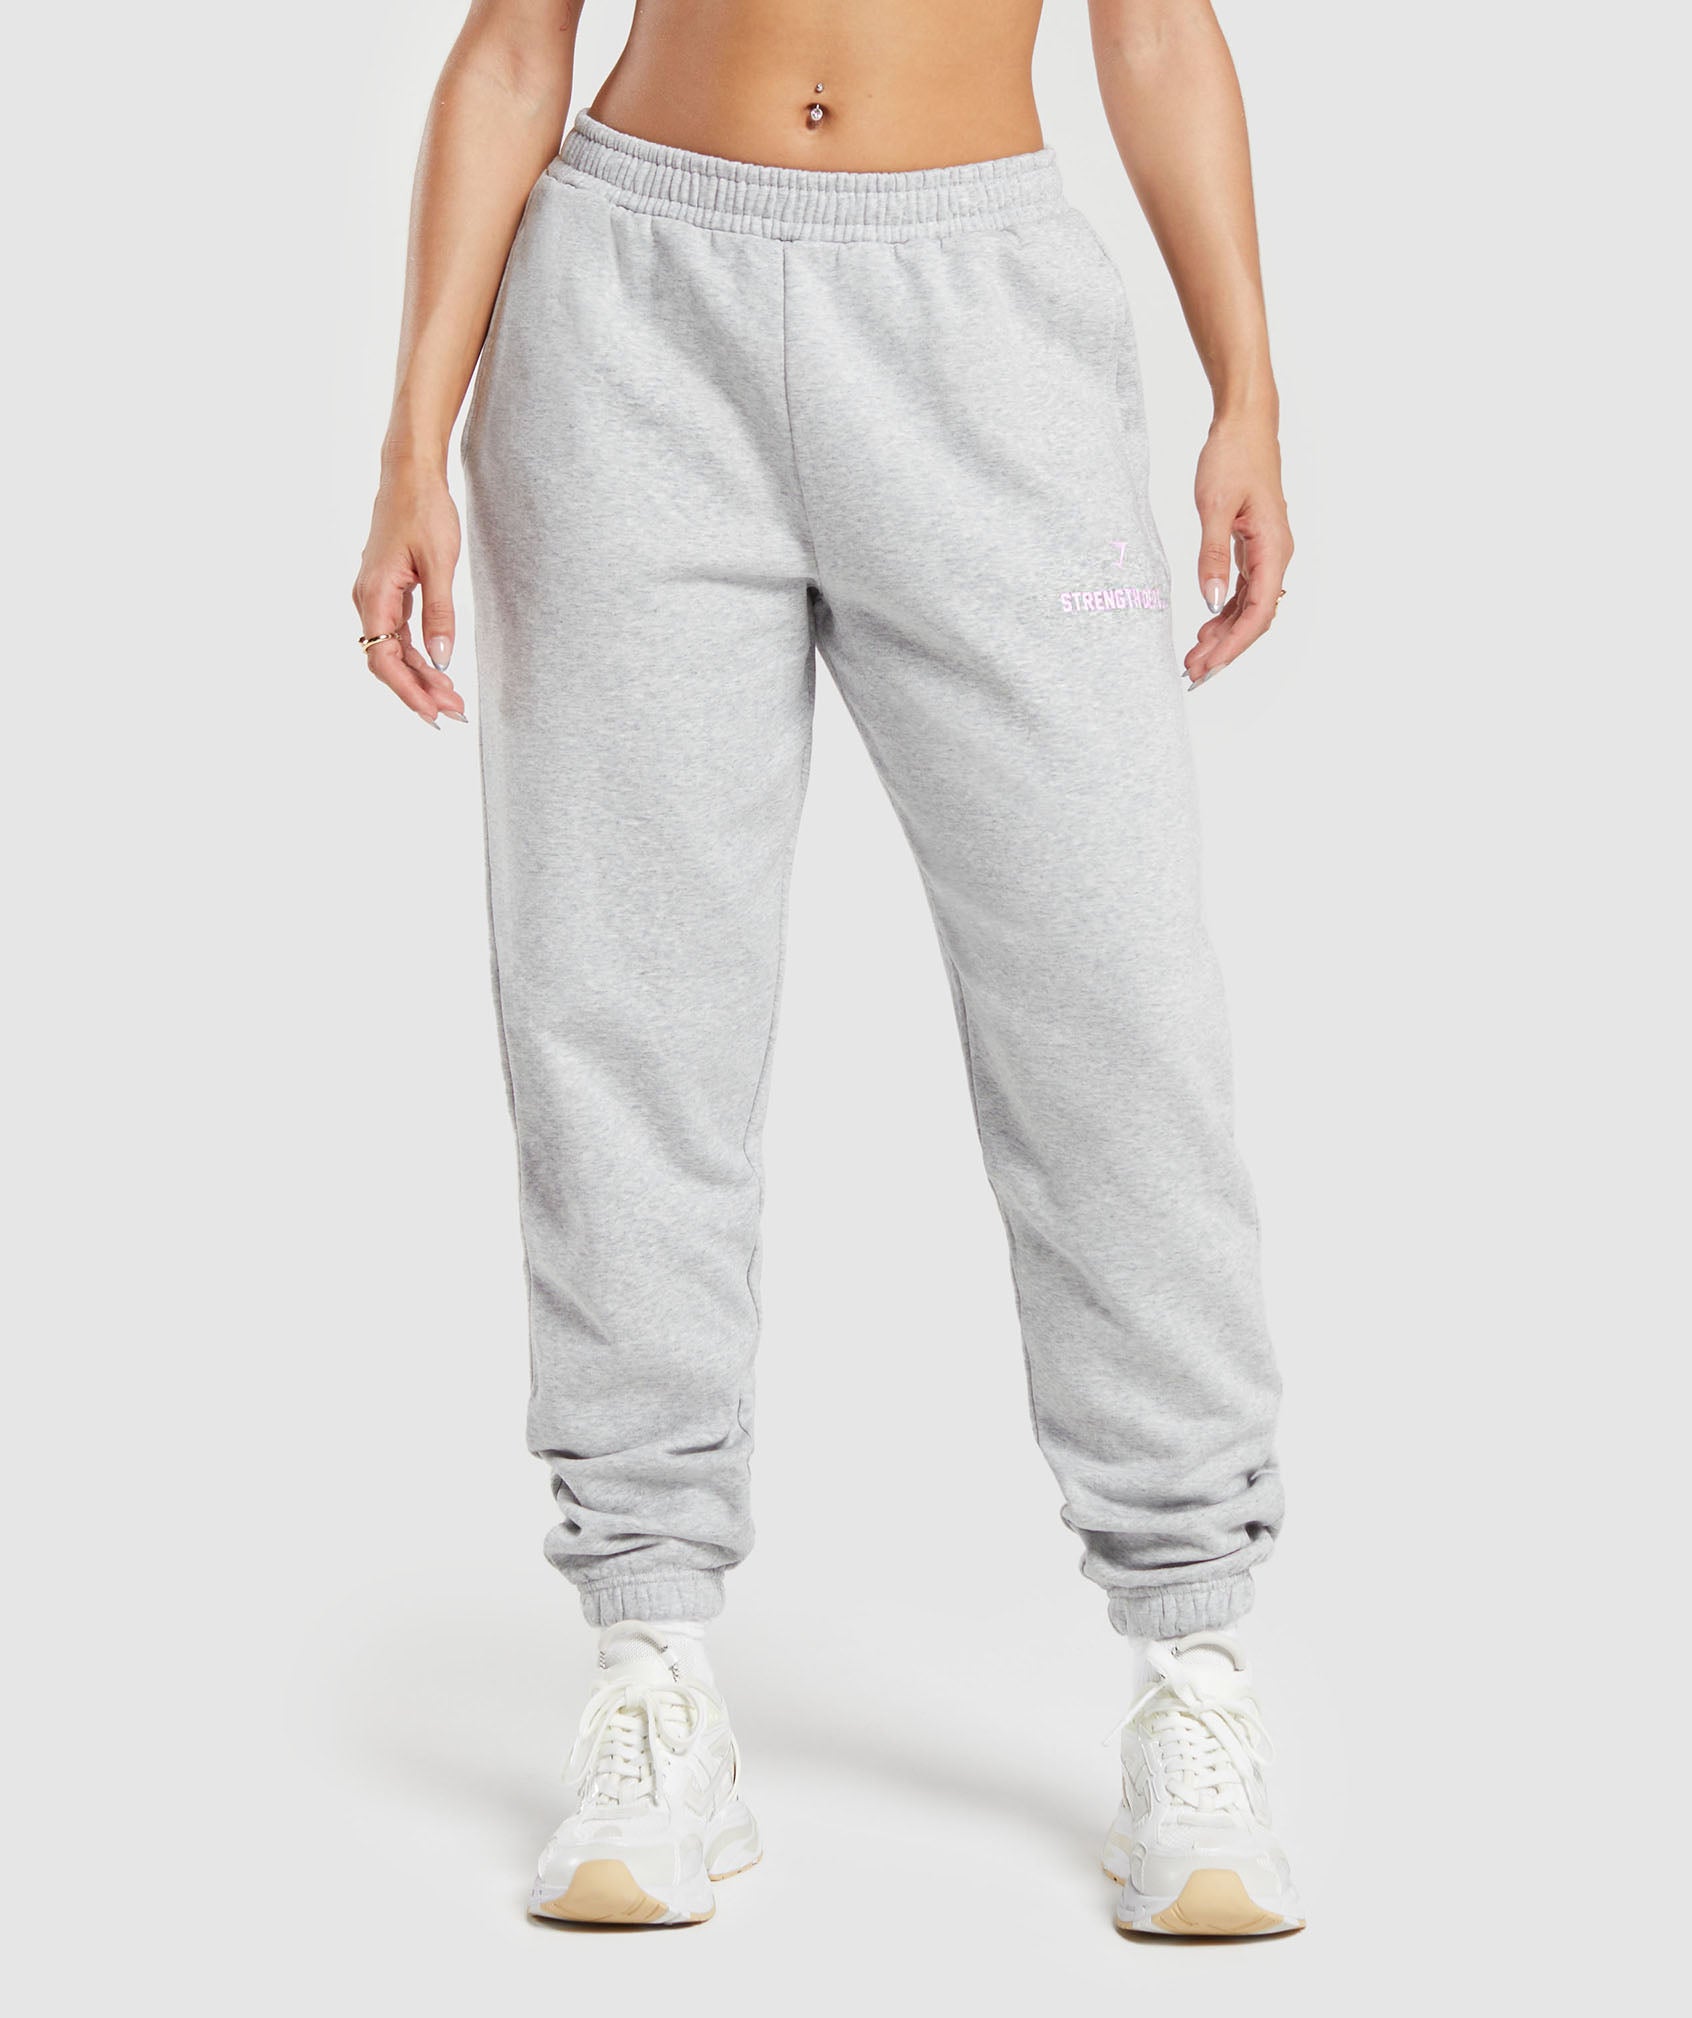 Strength Department Graphic Joggers in Light Grey Core Marl - view 1